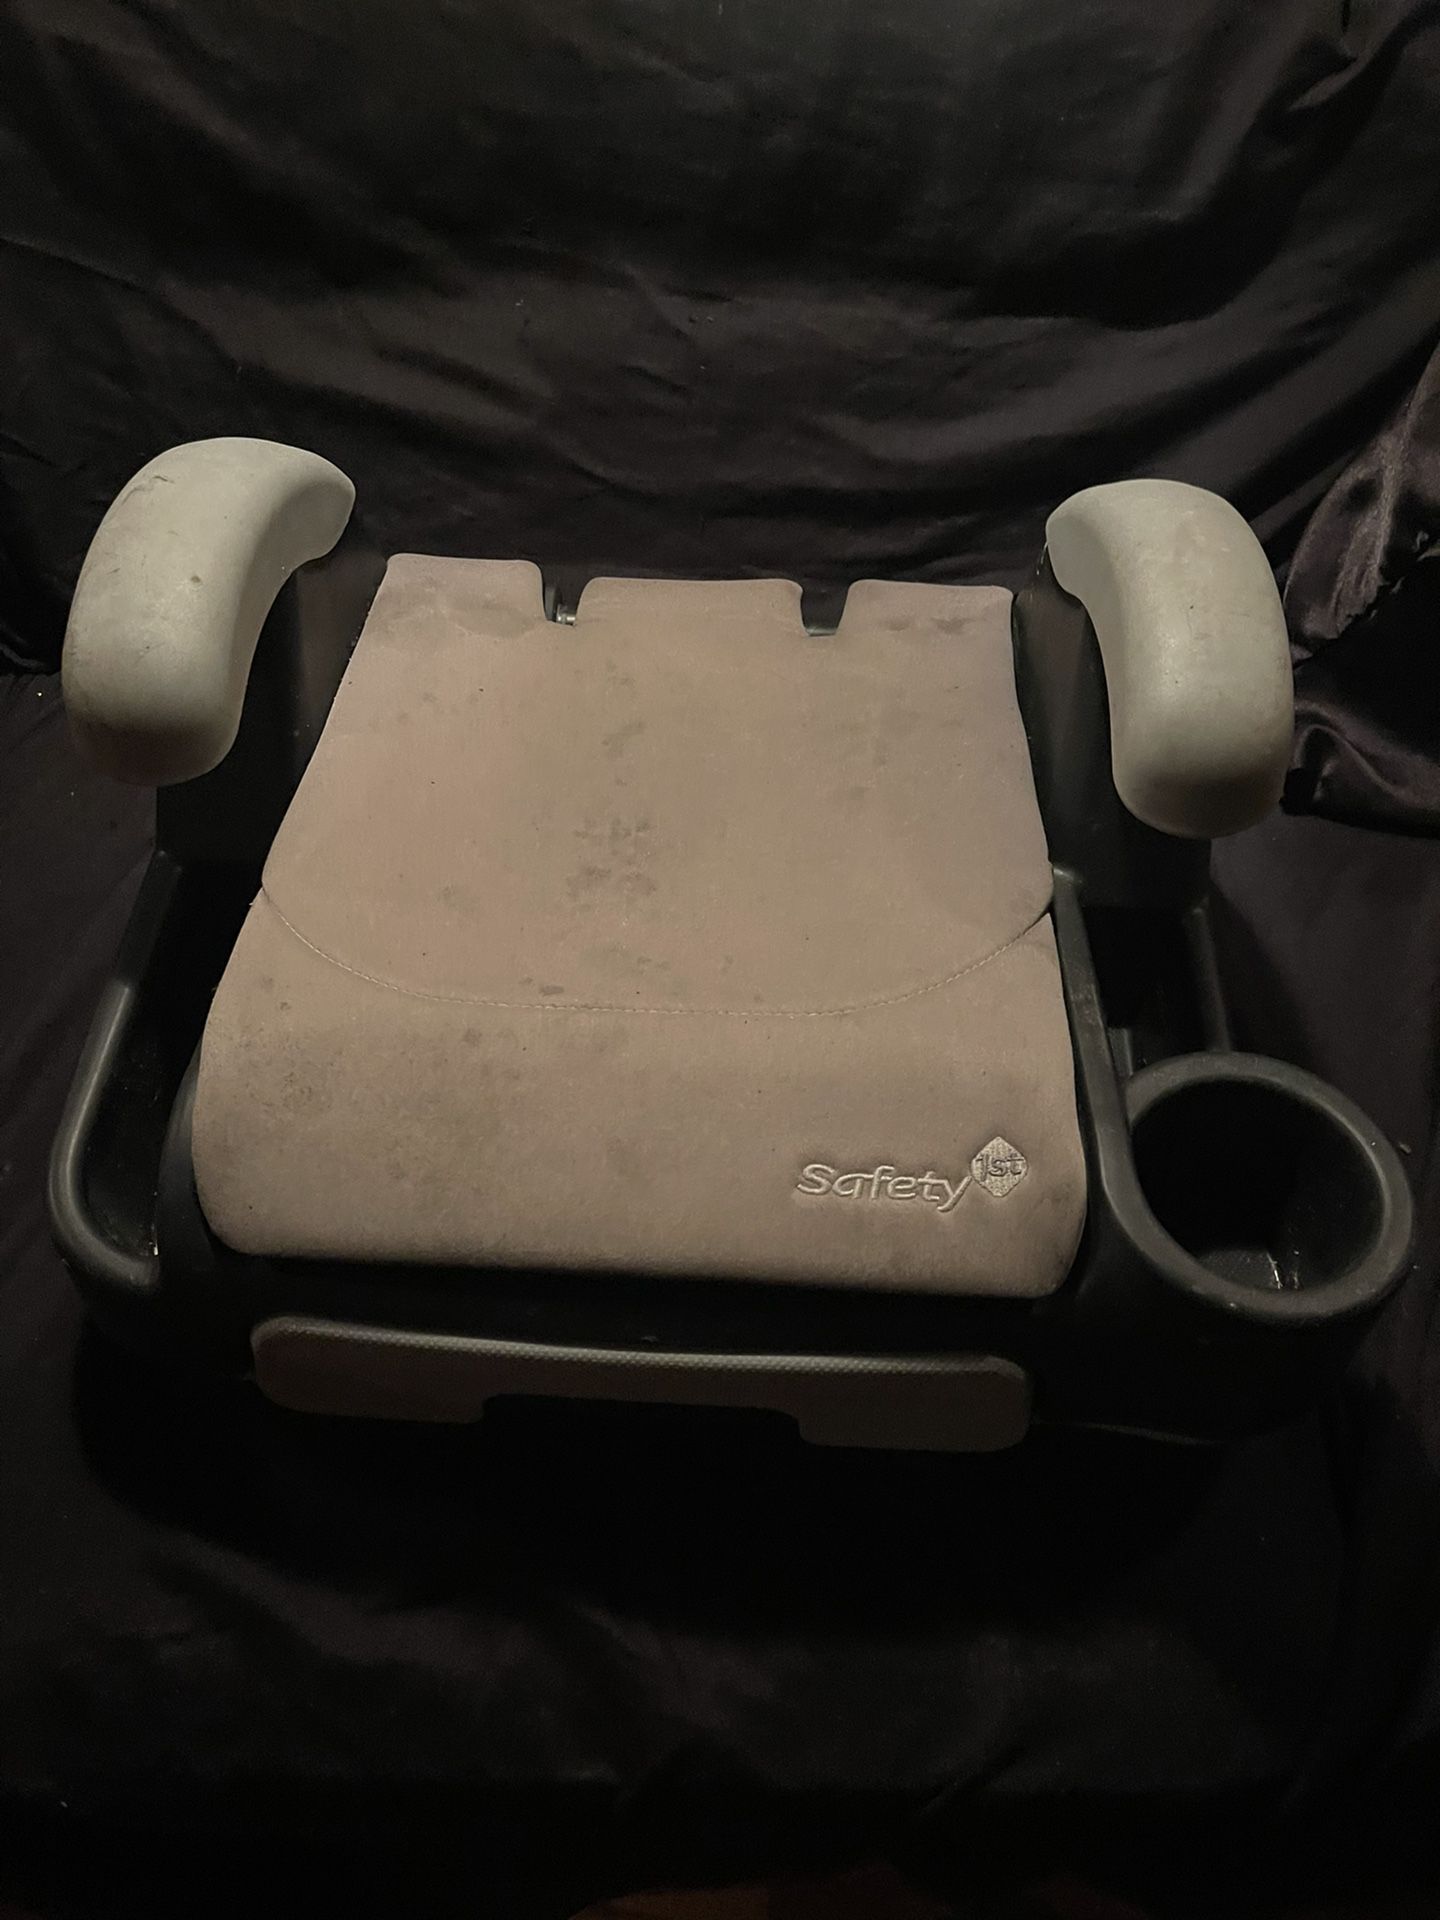 Safety 1st booster Seat